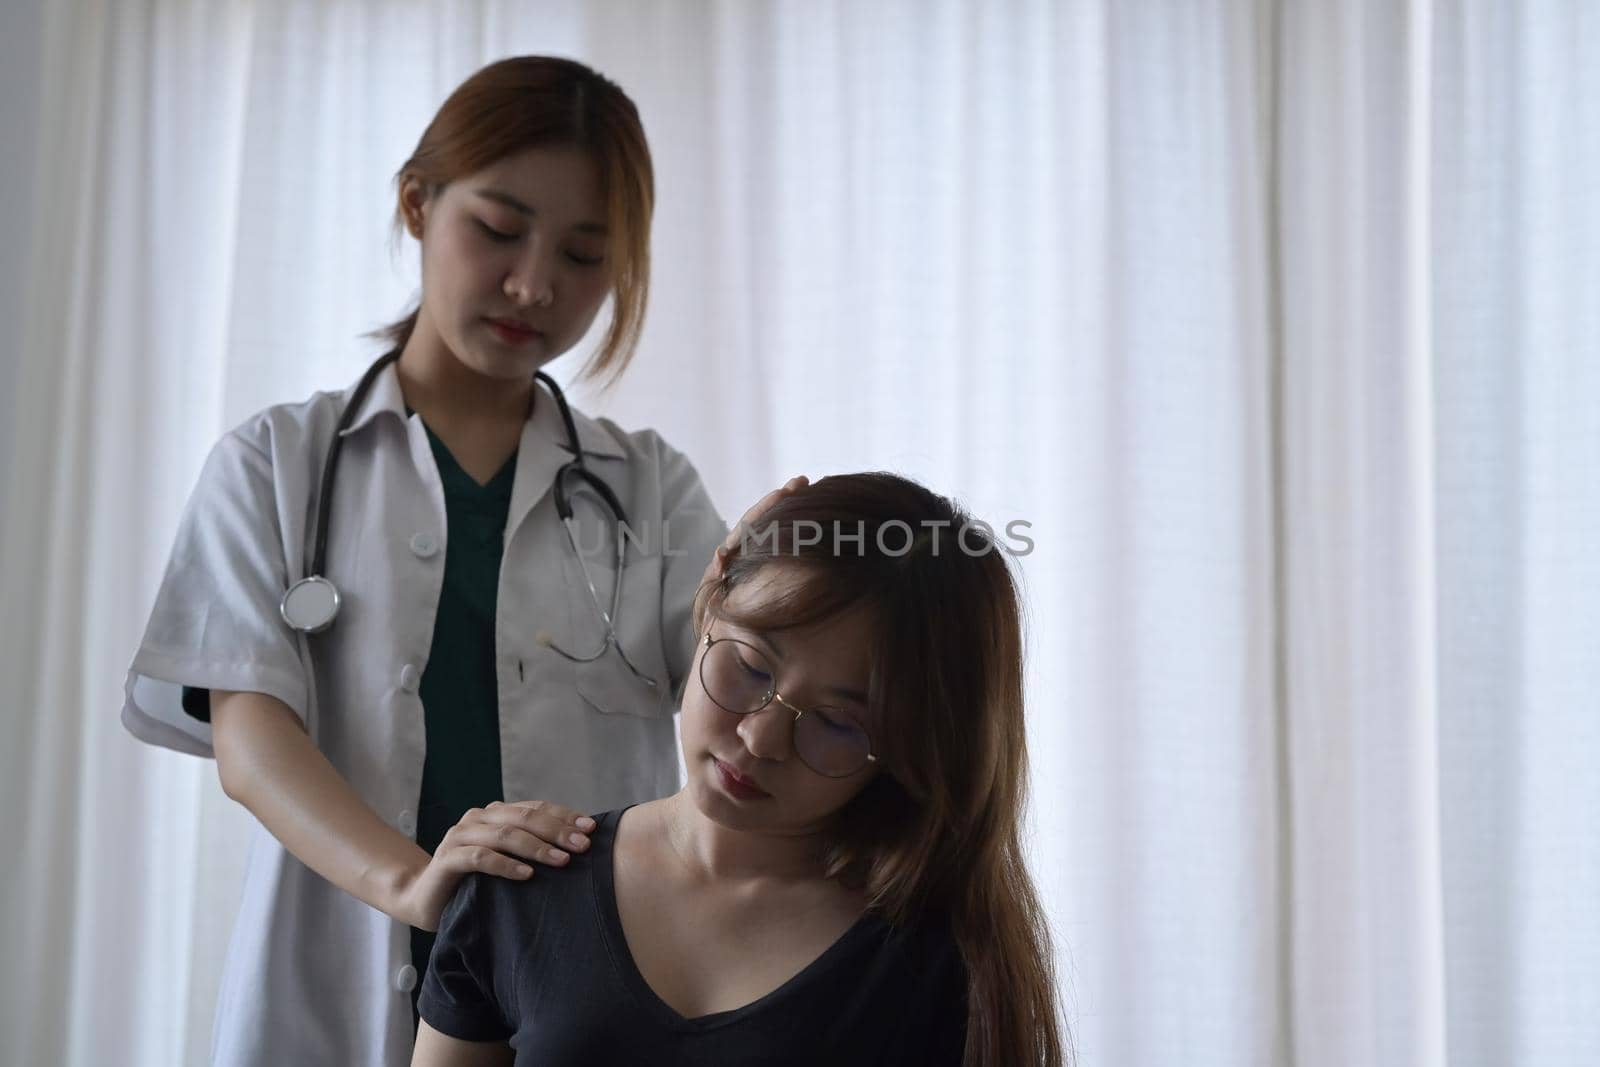 Professional physiotherapist examining female patient with neck injuries. Rehabilitation physiotherapy concept. by prathanchorruangsak